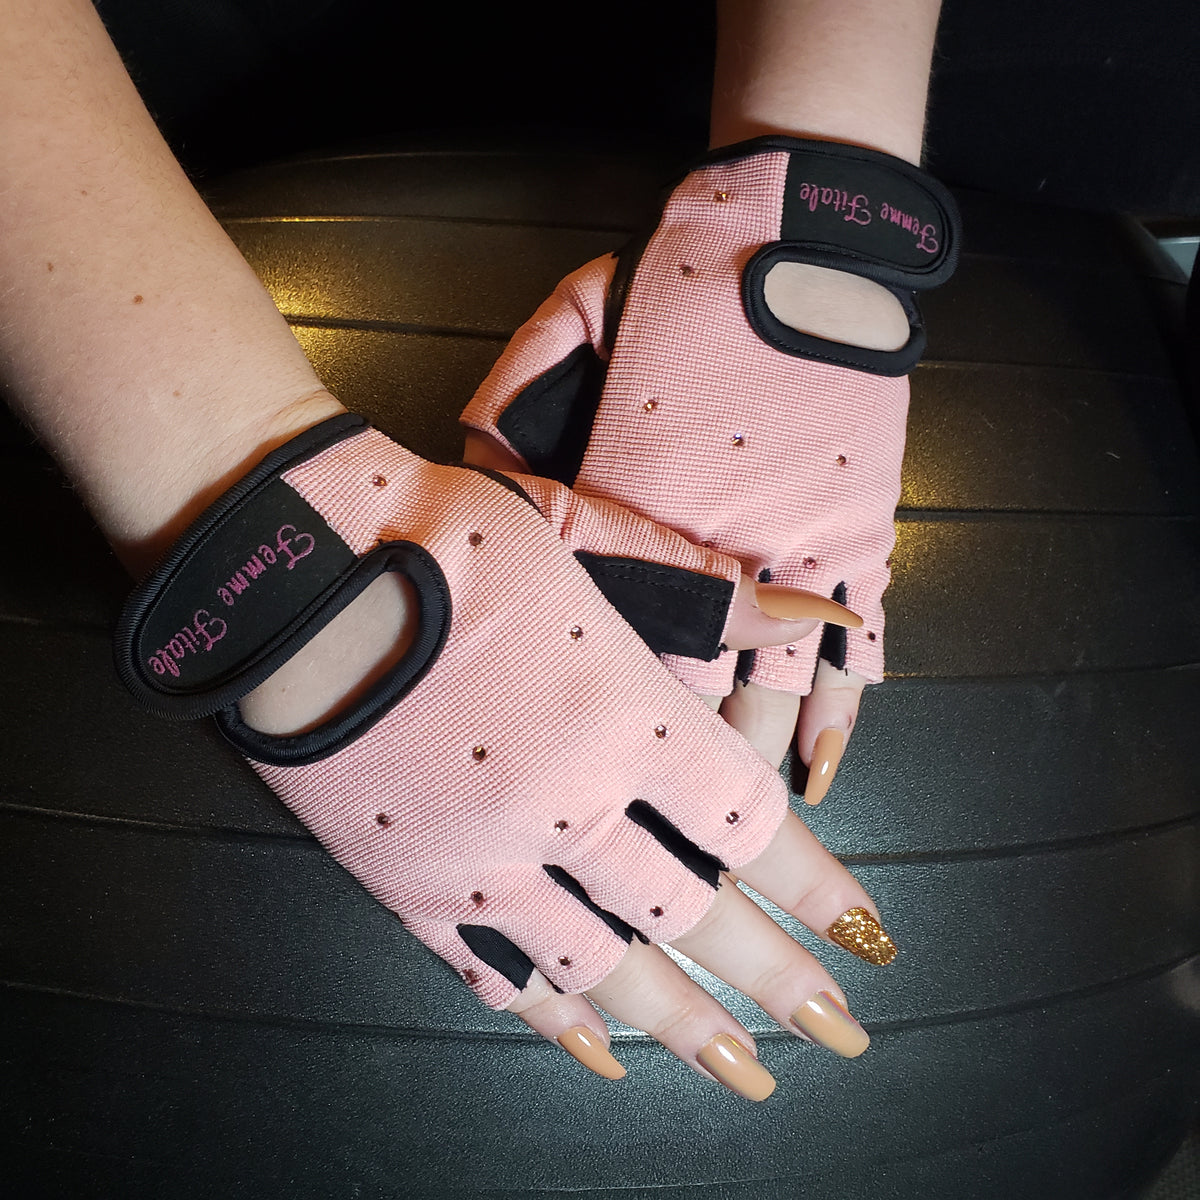 Femme Fitale Pink Swarovski Crystal Womens Fitness Weight Gloves